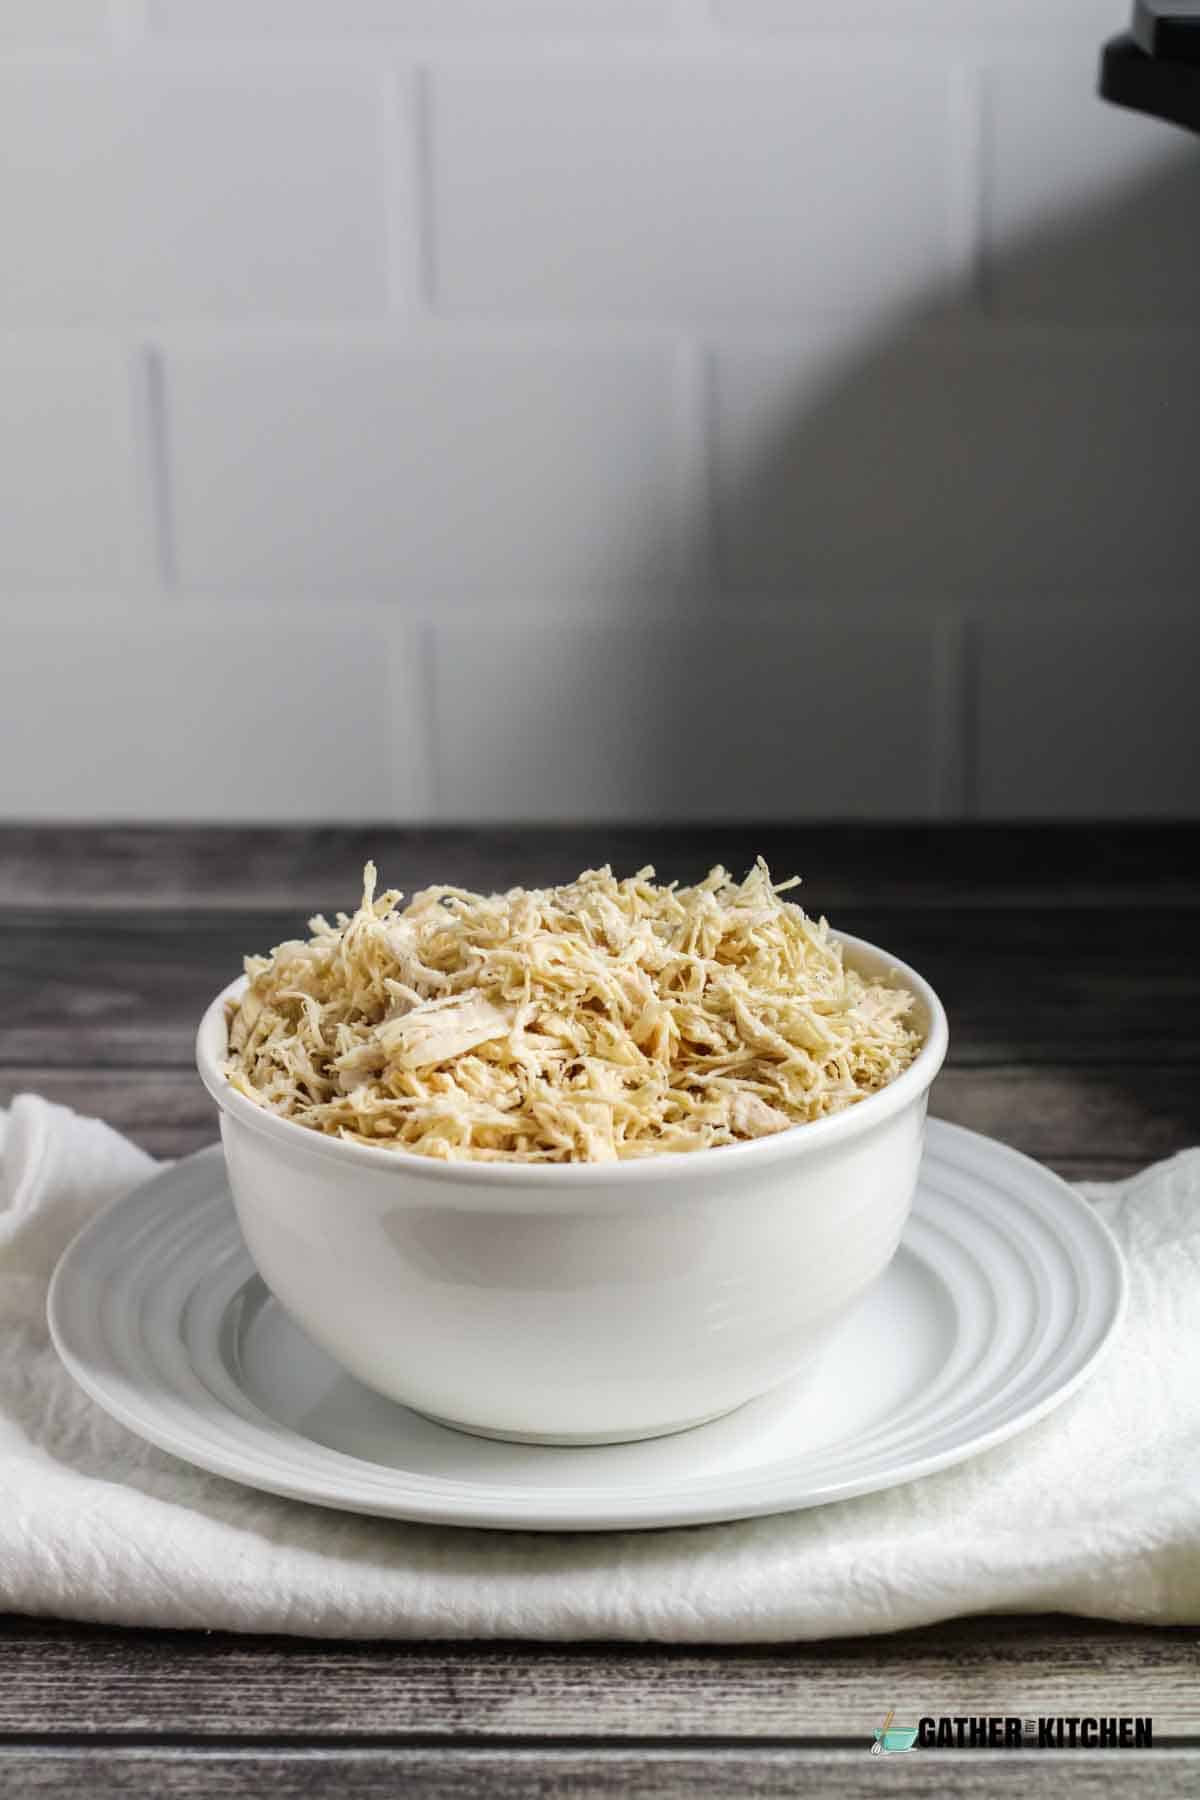 Instant pot shredded chicken in a bowl positioned on a plate.